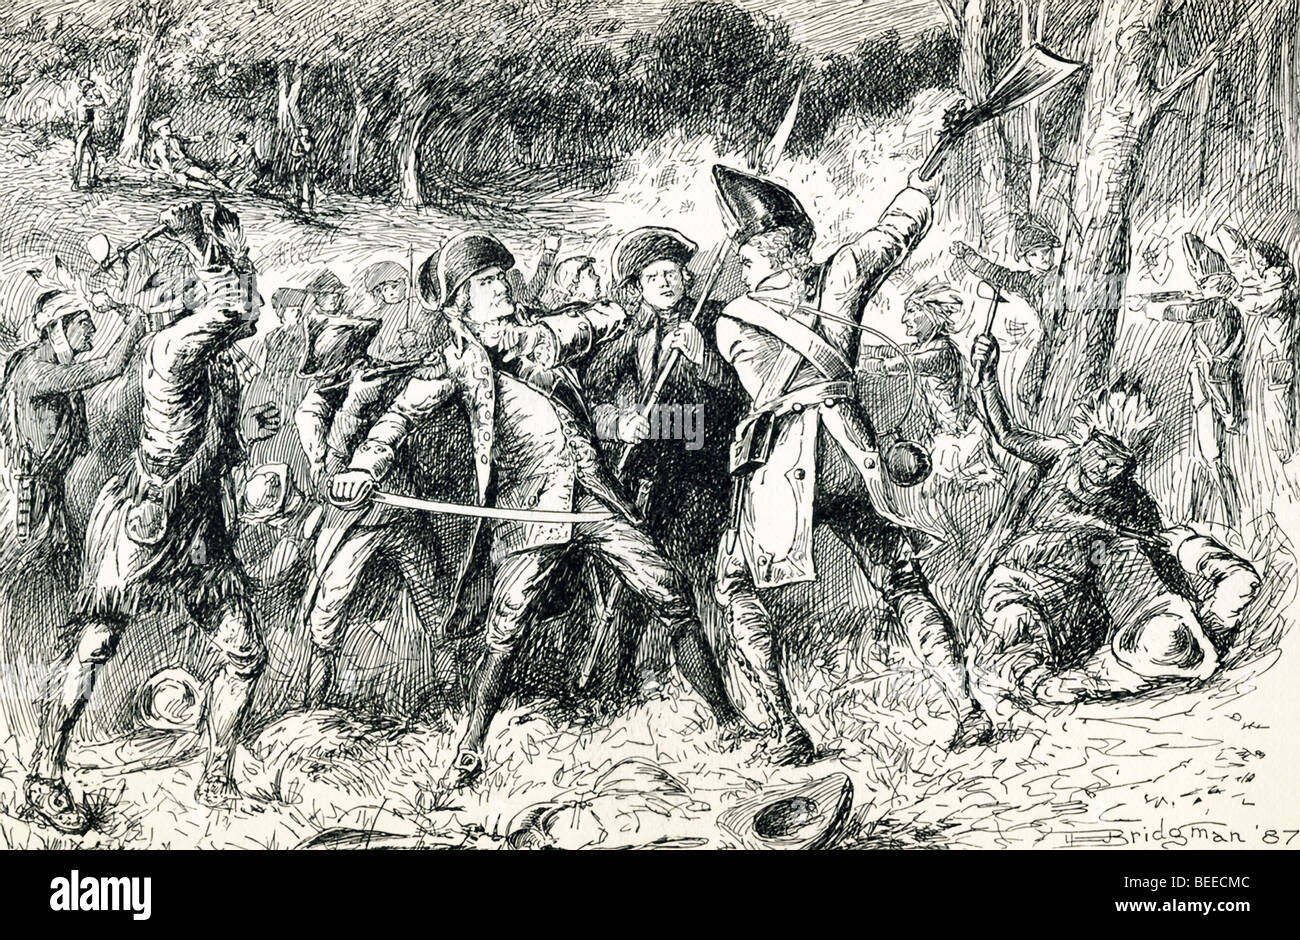 The Battle of Oriskany, fought on August 6, 1777, was part of the Saratoga Campaign during the American Revolution. Stock Photo